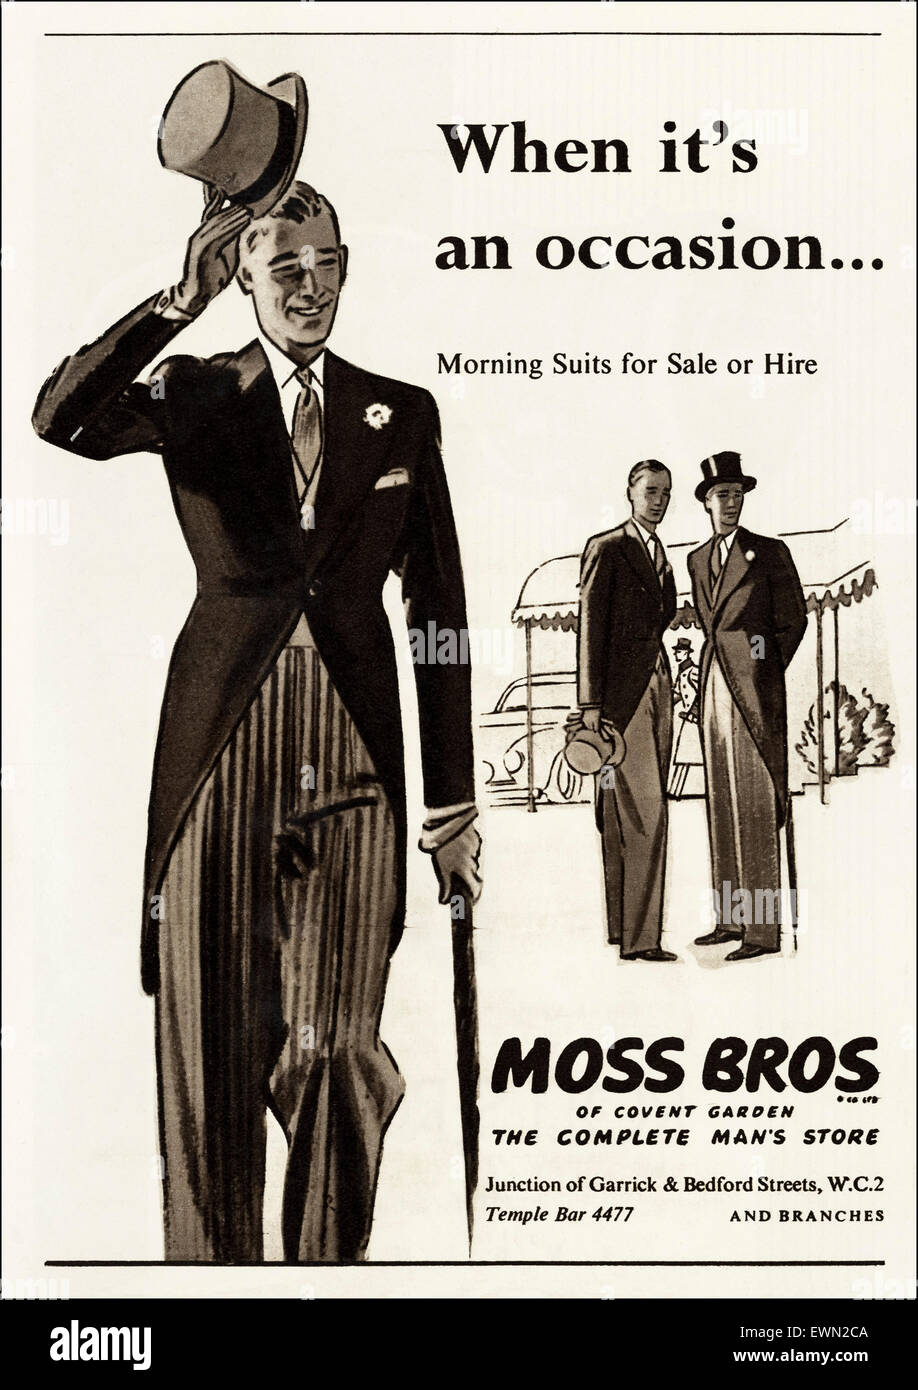 1950s advertisement circa 1954 magazine advert for Moss Bros morning suits for hire Stock Photo